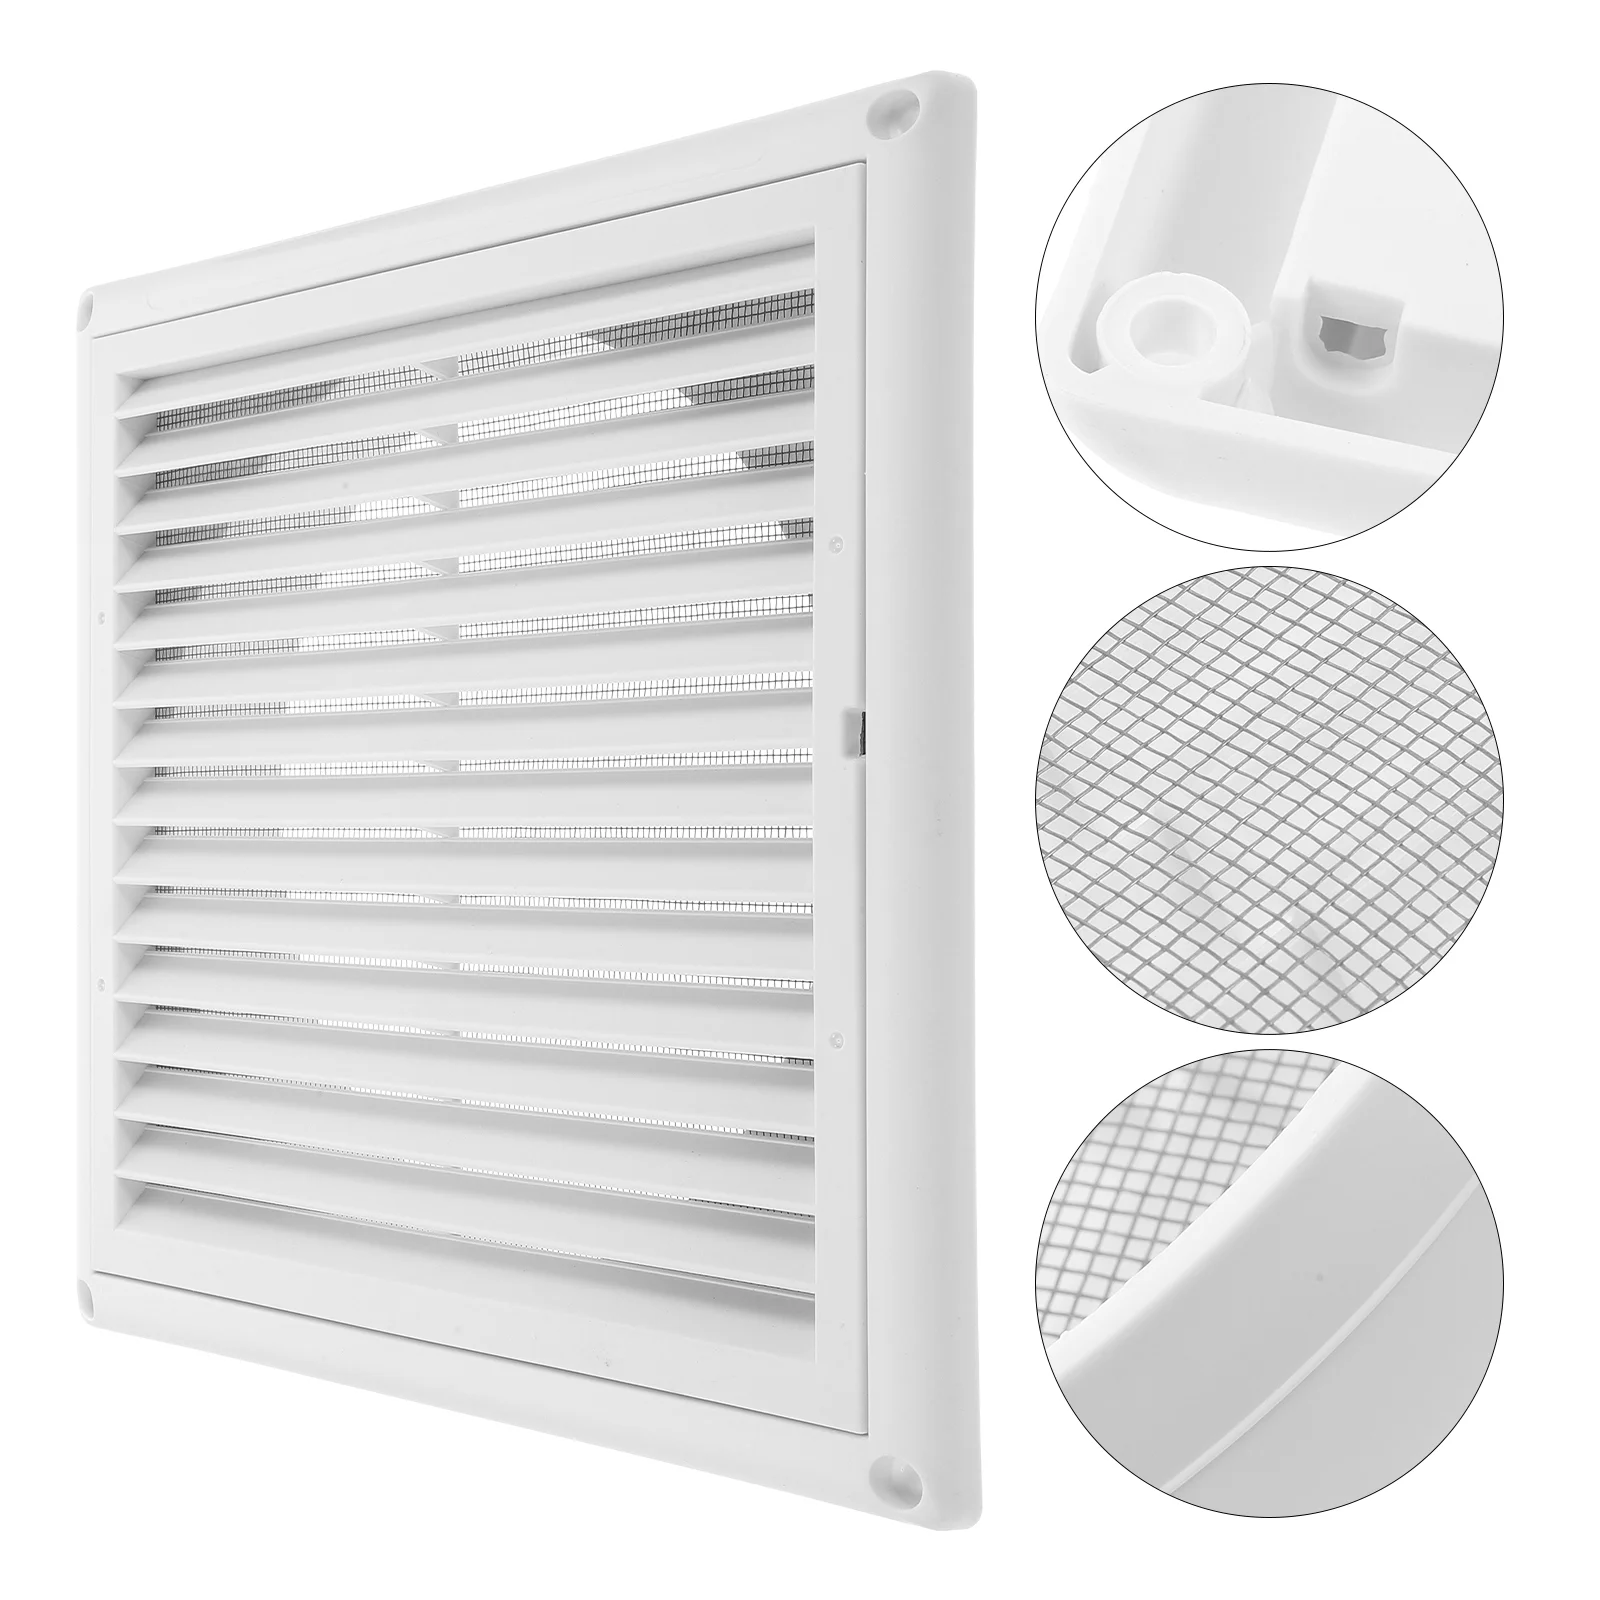 

Exhaust Hood Vent Covers For Home Wall Air Ceiling Air Vent Grille Tuyere Return Bathroom White Adjustable Cover Plastic